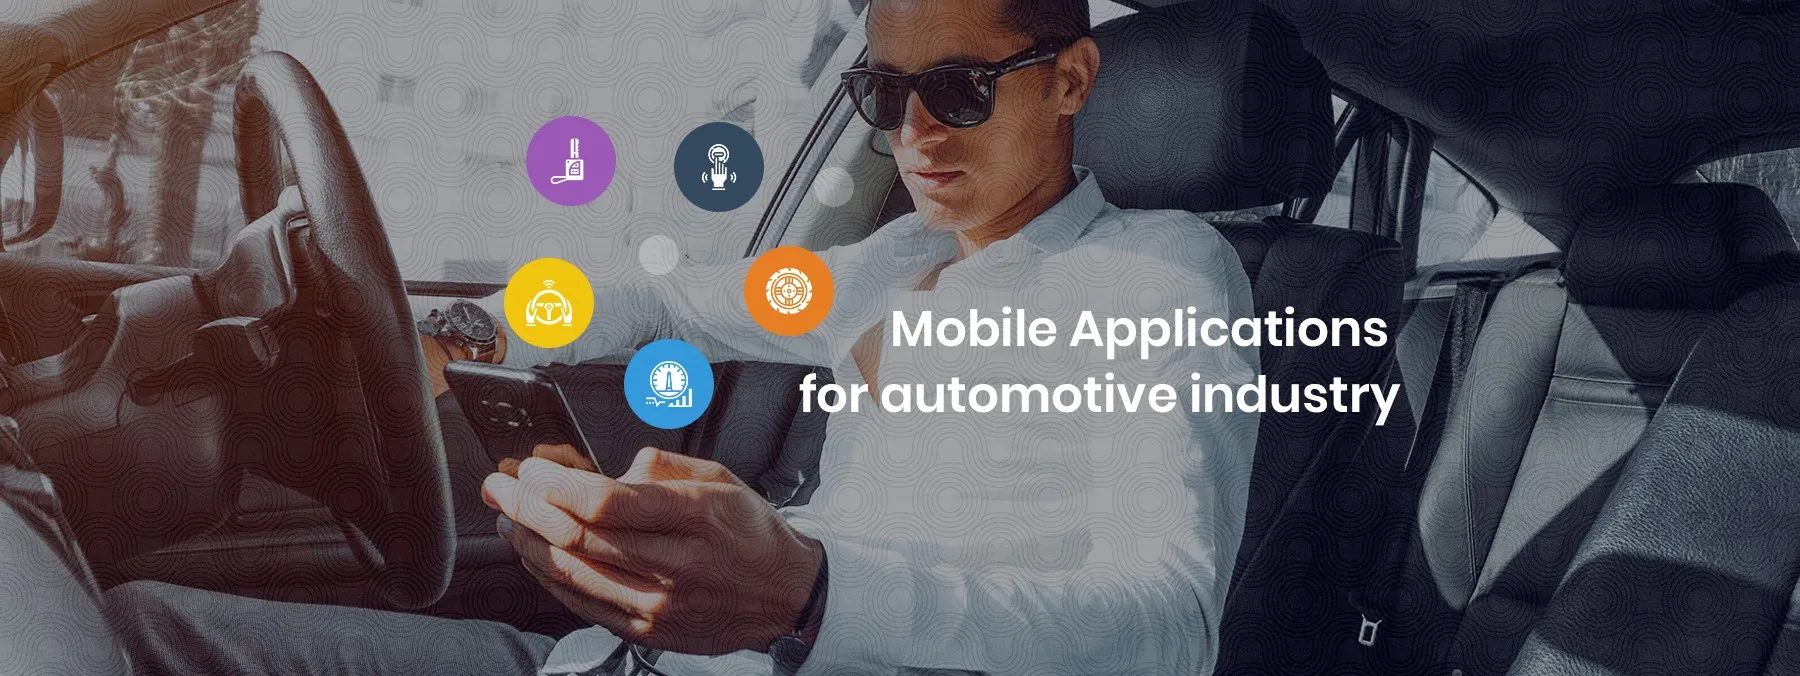 Developing Mobile Applications for the Automotive Industry